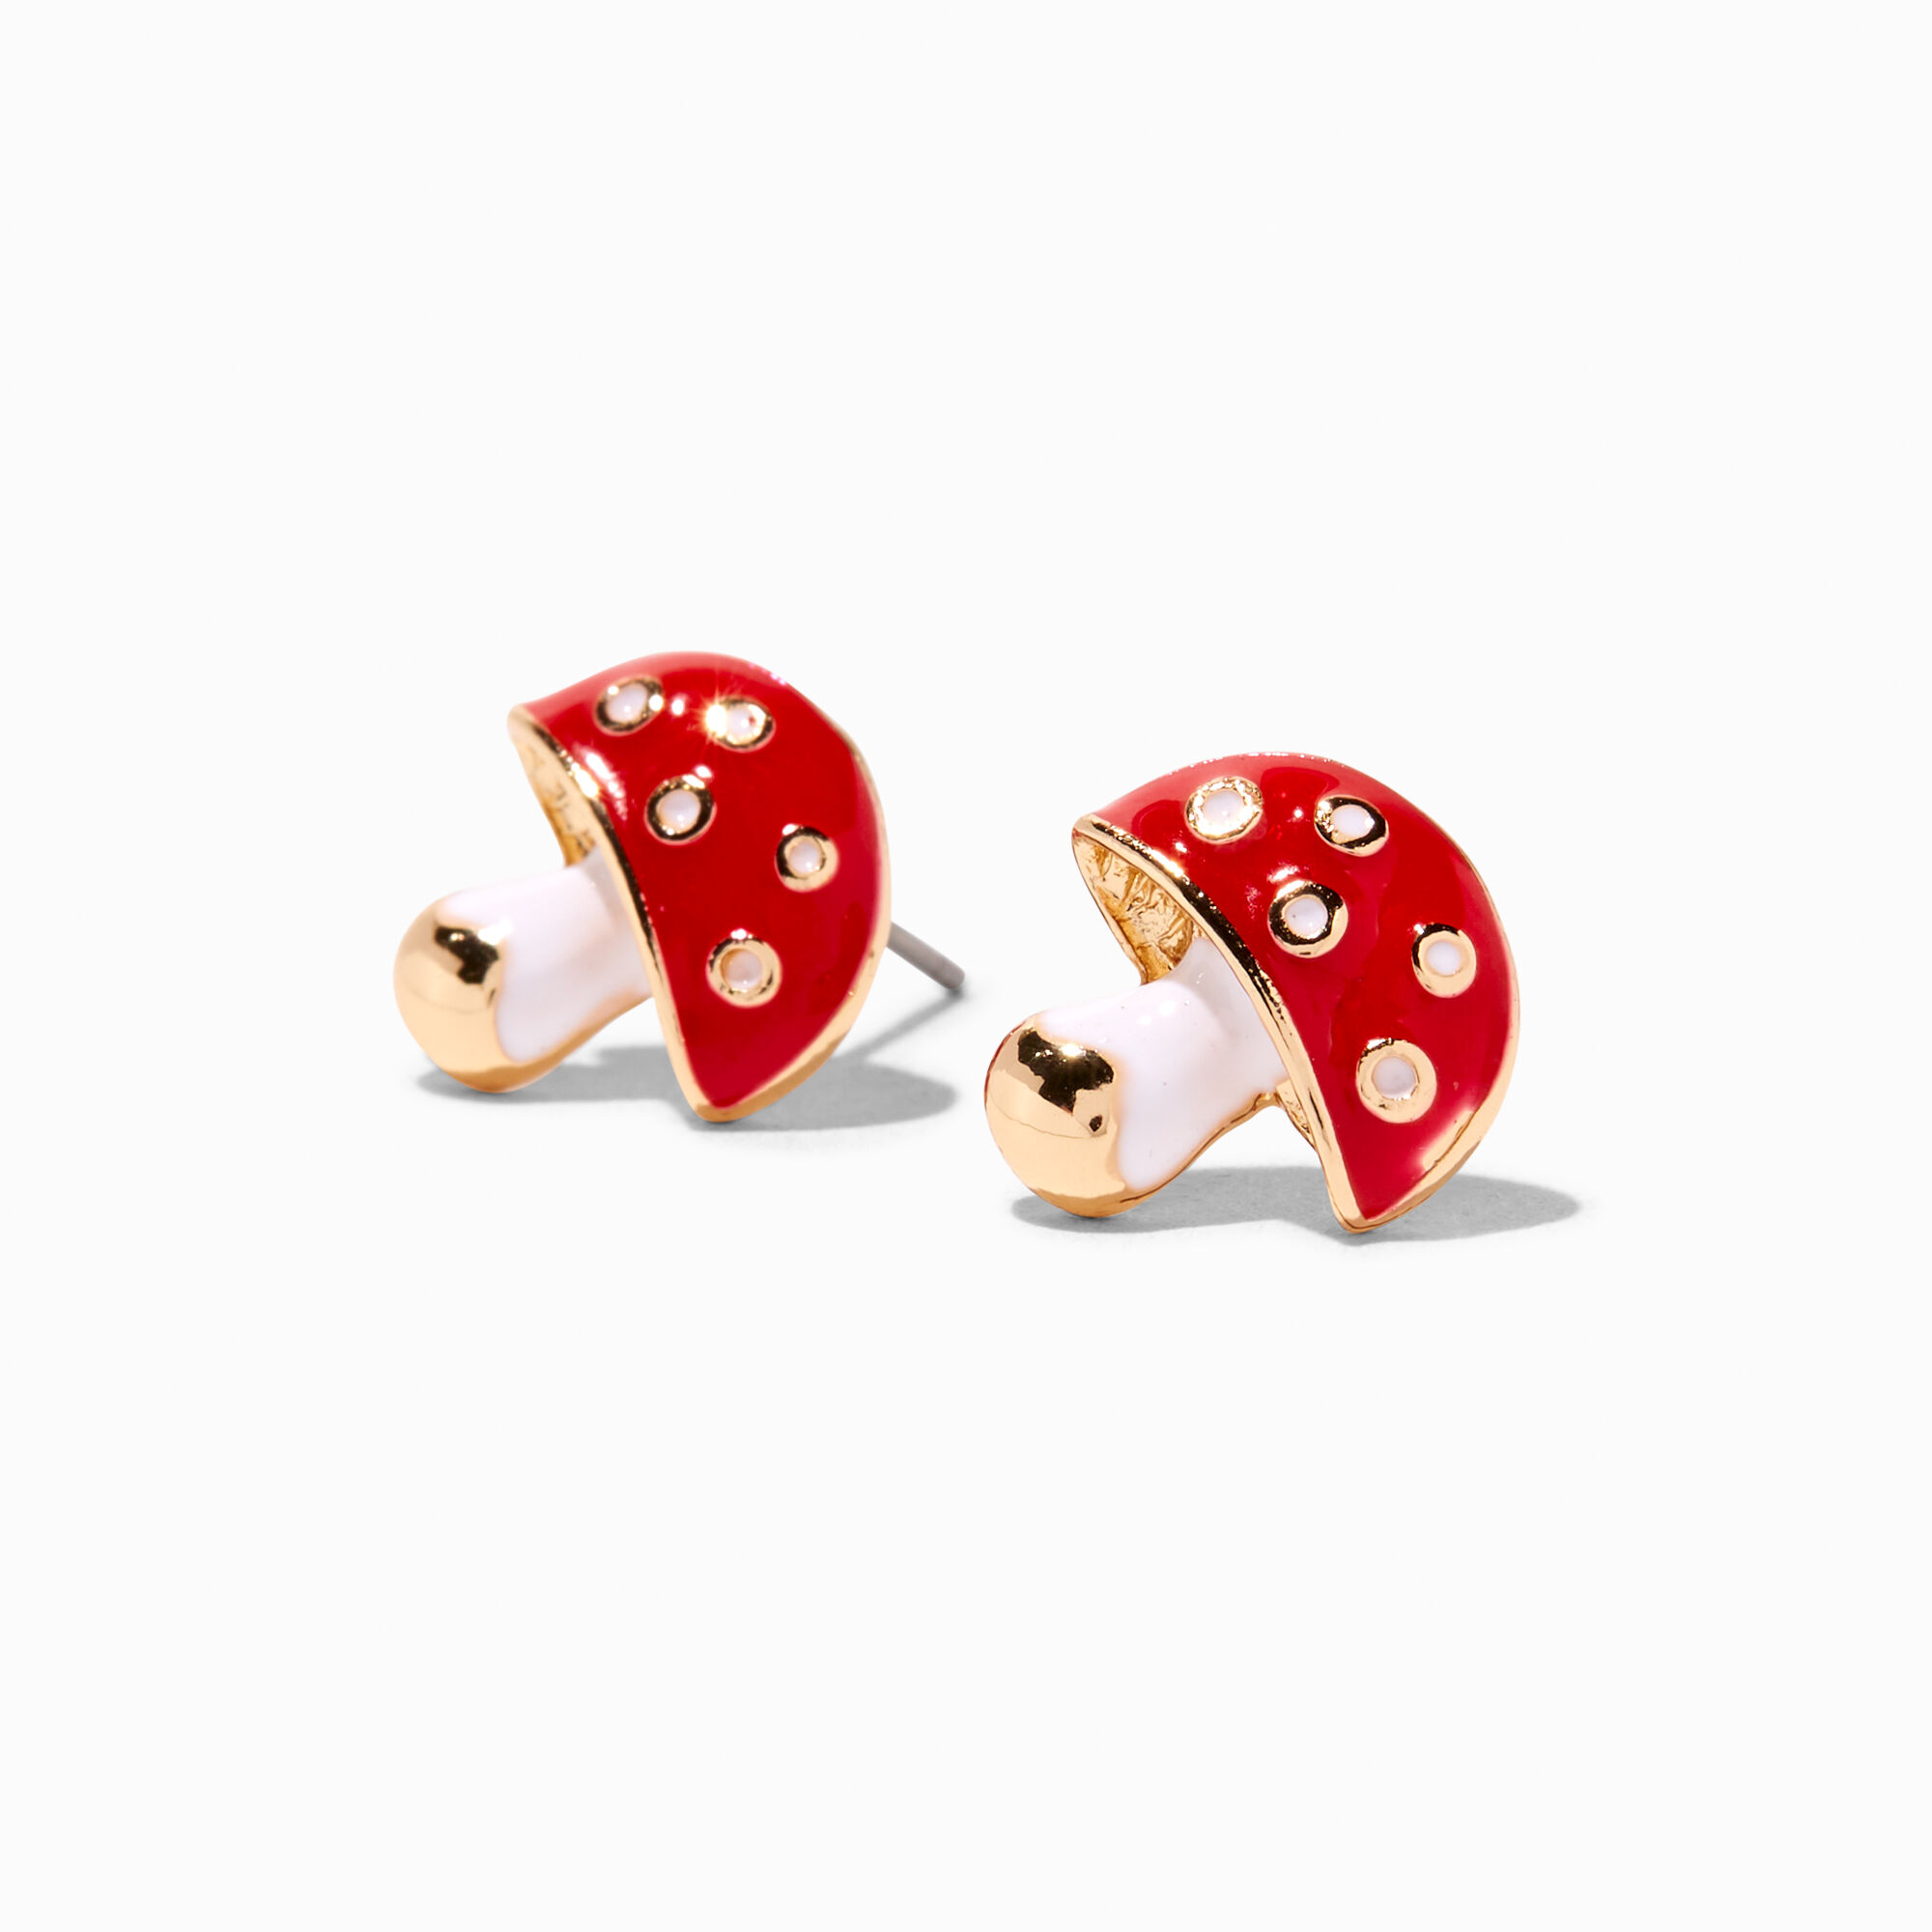 View Claires Mushroom Embellished Gold Stud Earrings Red information